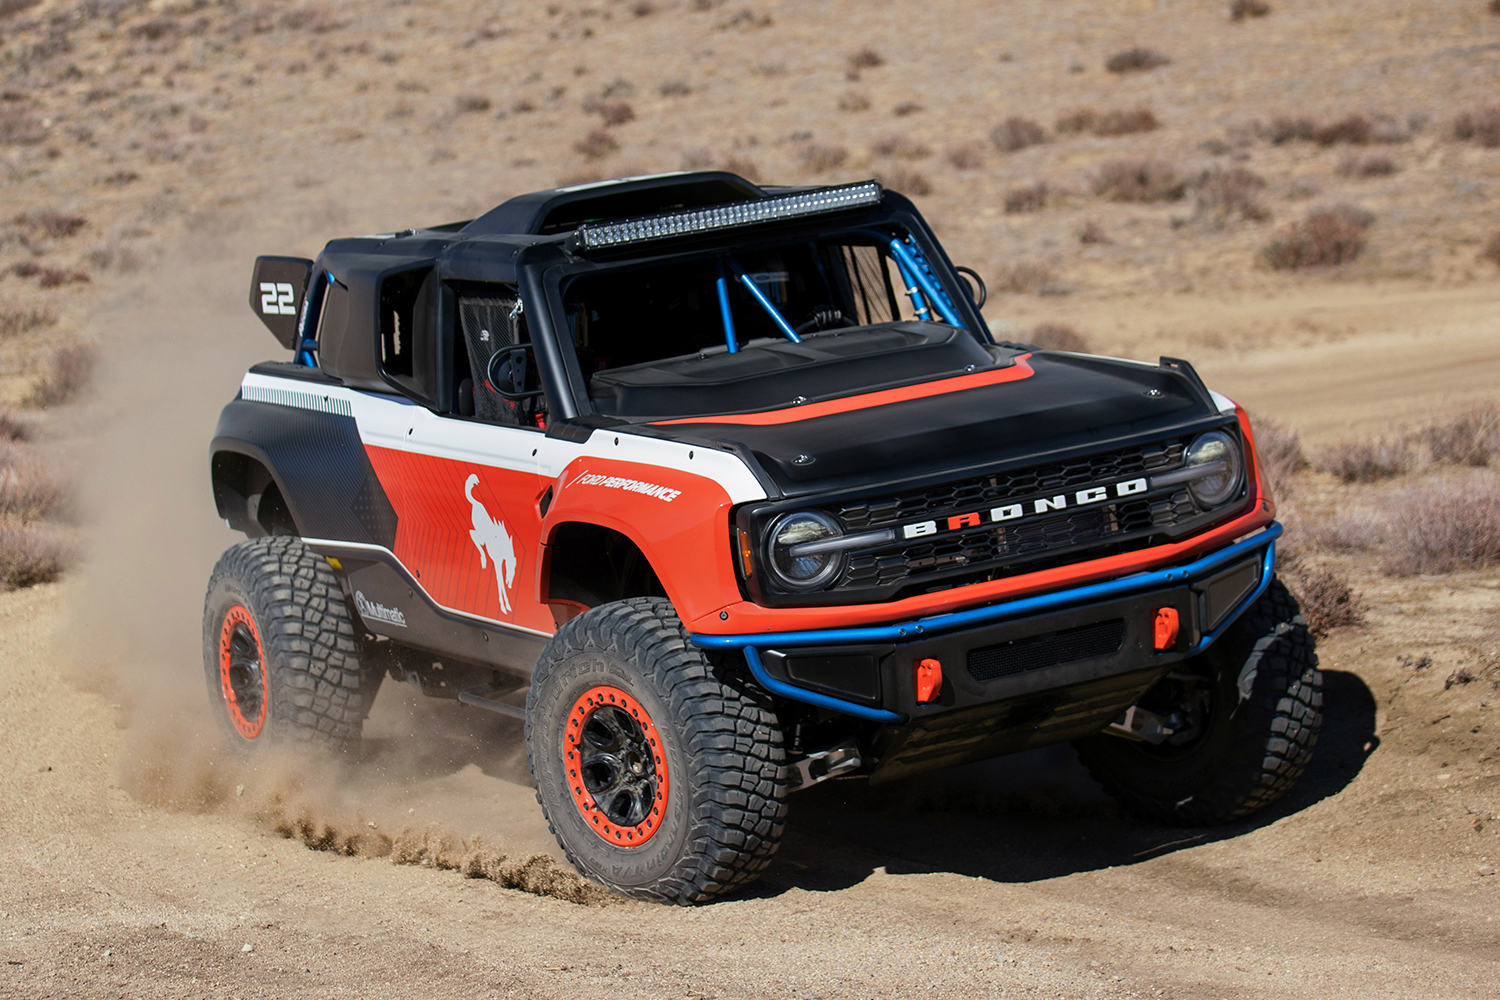 The 2023 Ford Bronco DR, or Desert Racer, ripping around on sandy roads